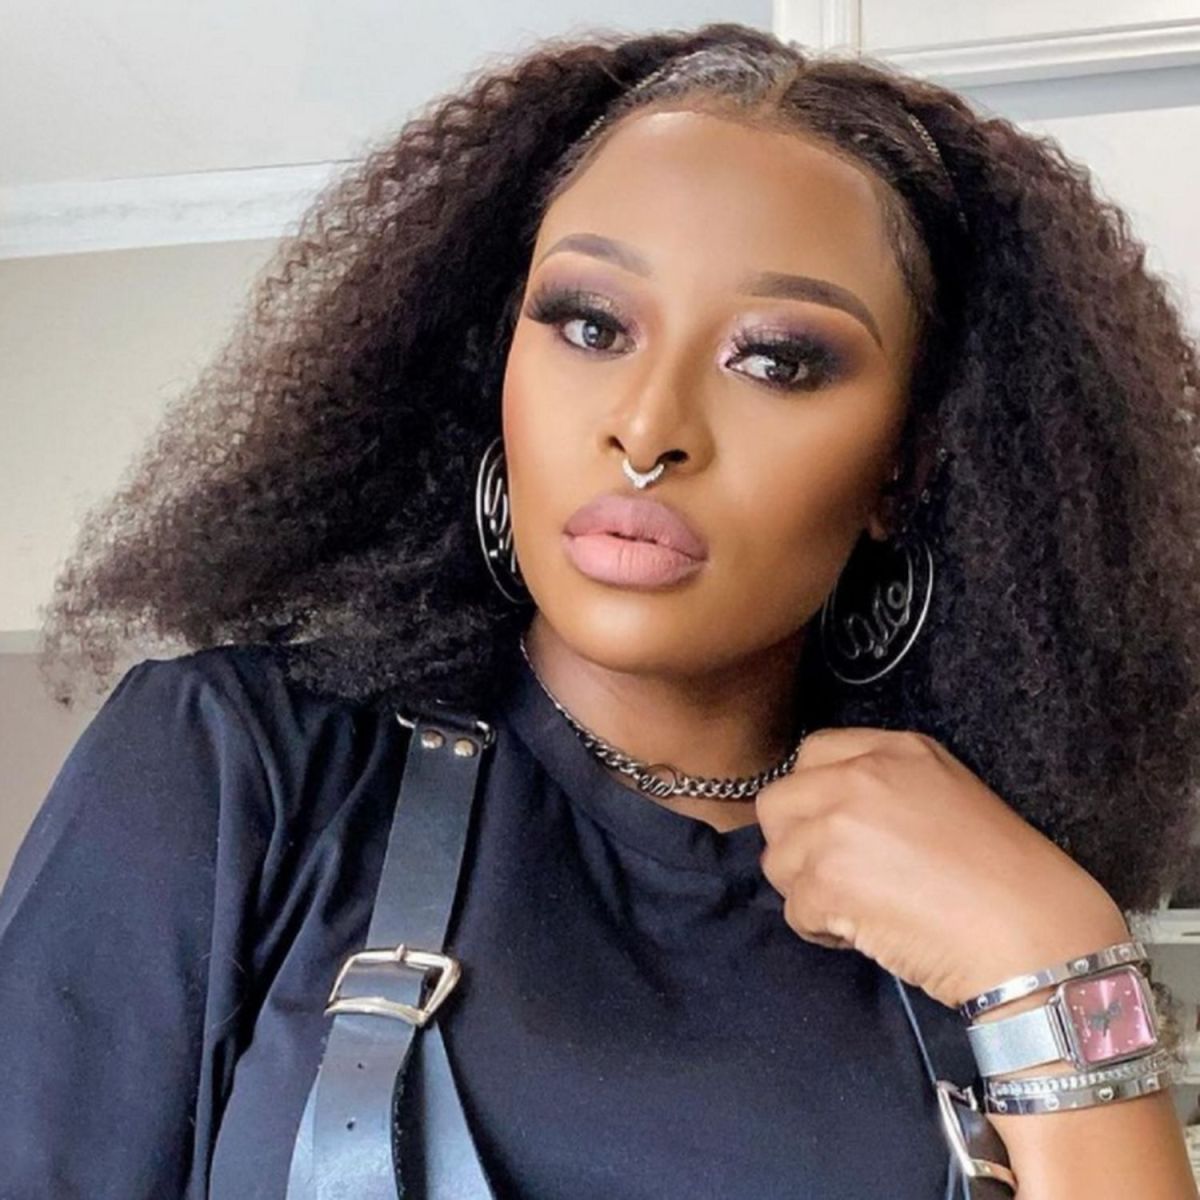 Dj Zinhle Praised For Her Reaction After Musa Khawula Called Her A Lesbian 1